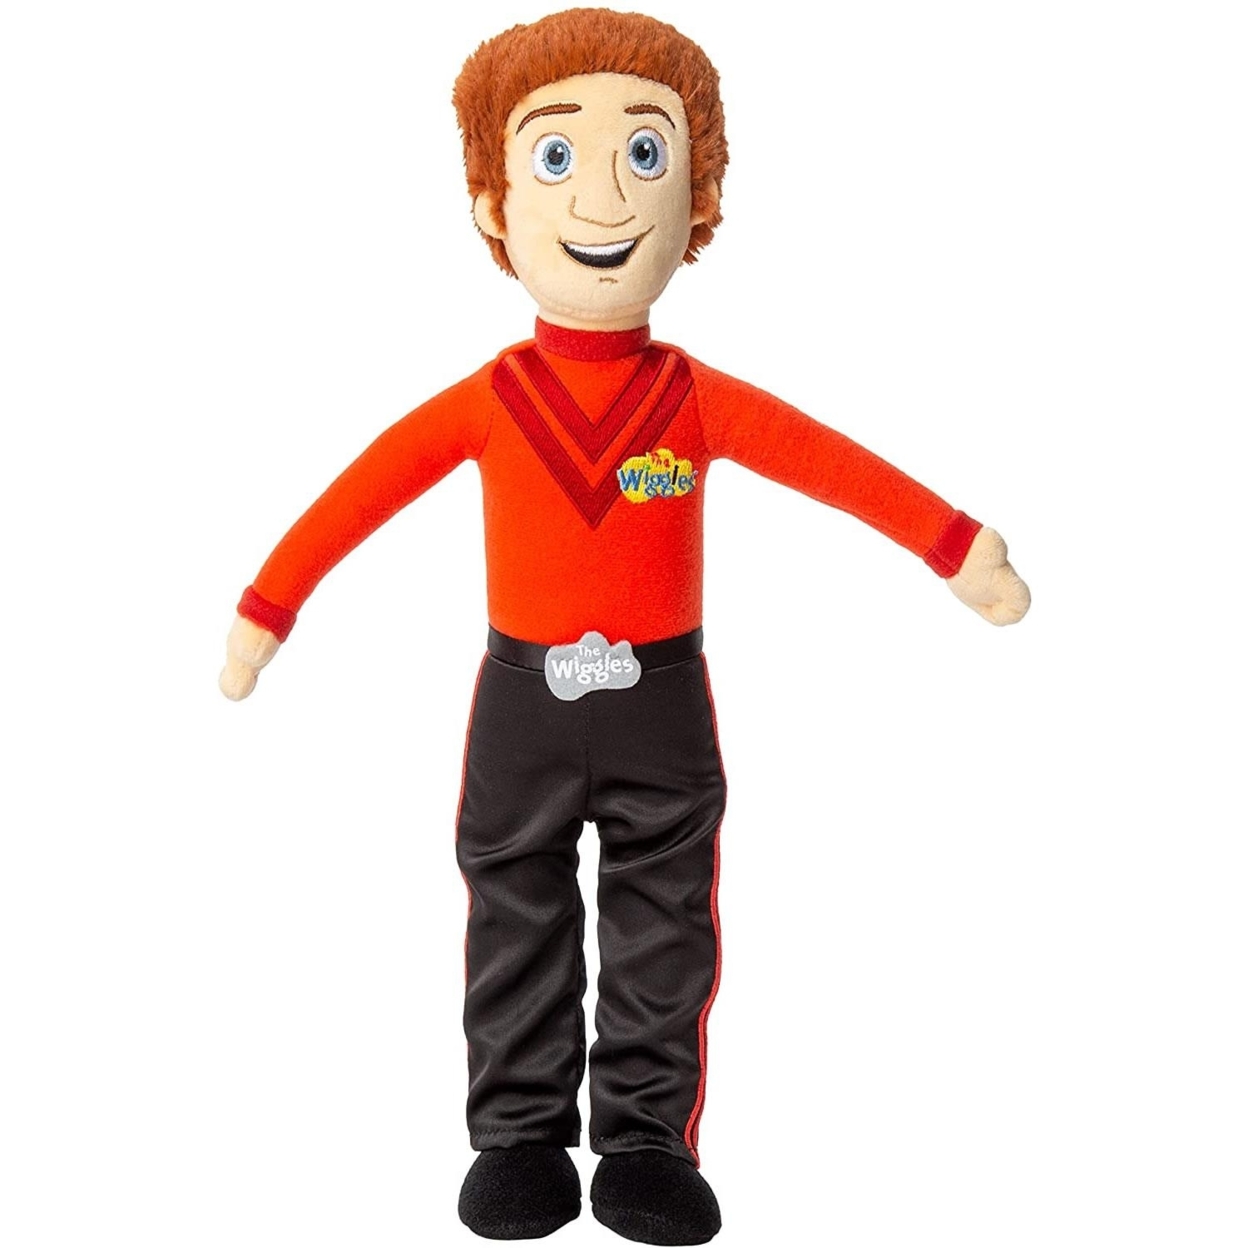 The Wiggles Red Wiggle Simon Pryce 14 Plush Doll Famous Kids Group Mighty Mojo